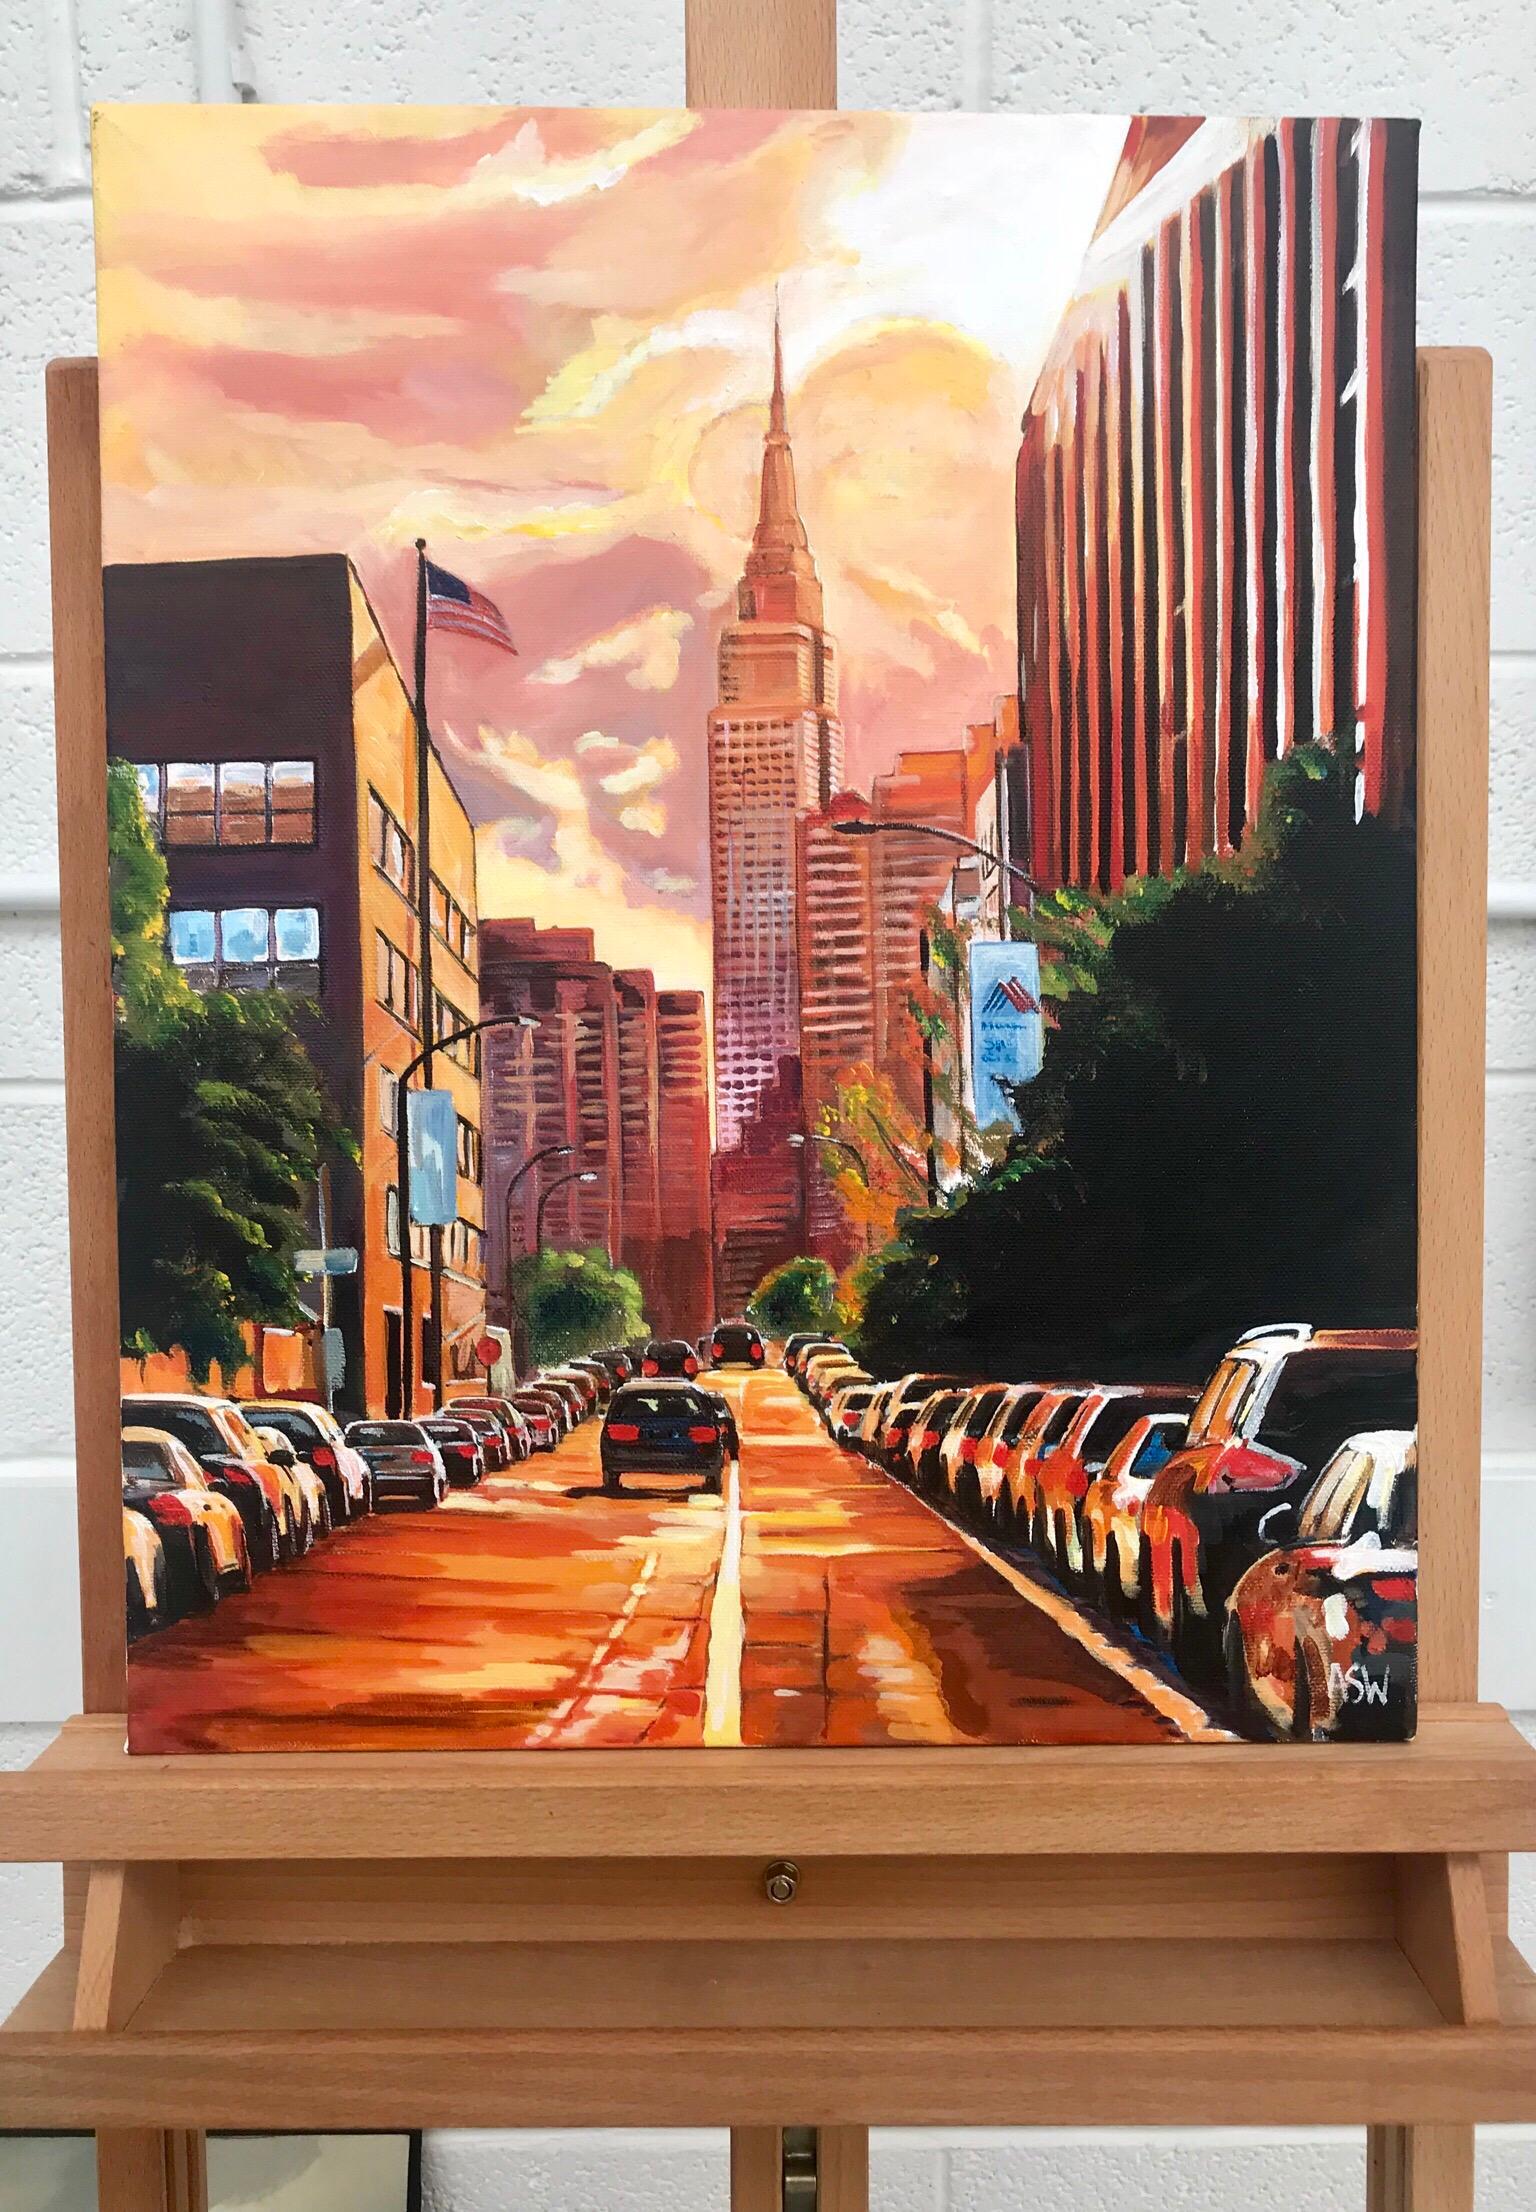 Empire State Building Sunset New York Cityscape NYC by English Landscape Artist - Post-Modern Painting by Angela Wakefield